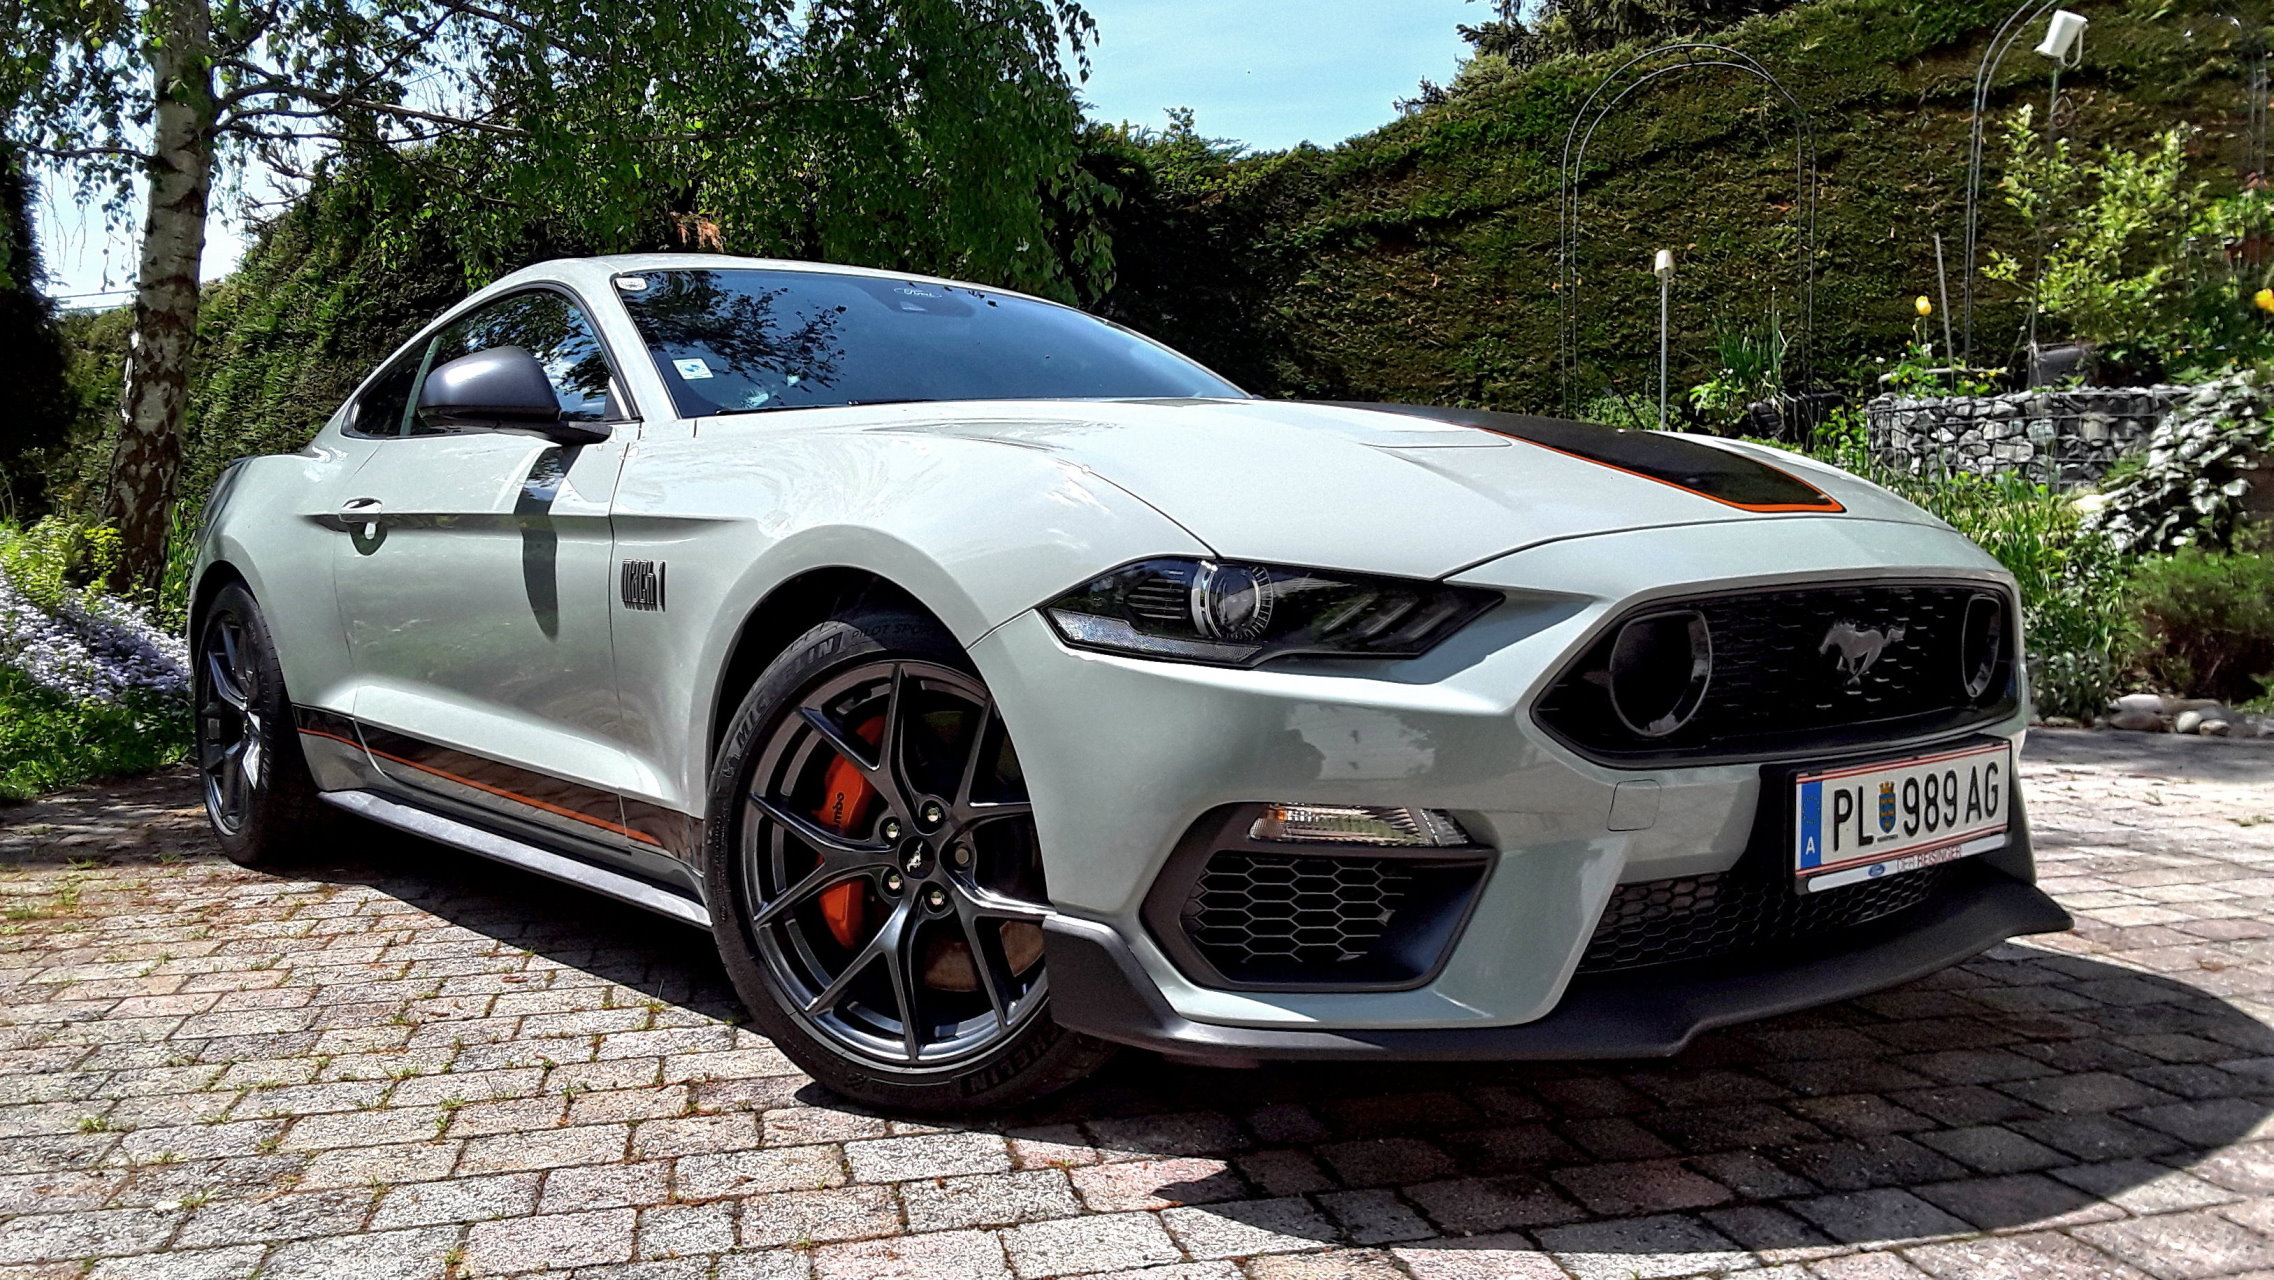 Ford Mustang Mach1 mit dem Appearance Package in Fighter Jet Grey